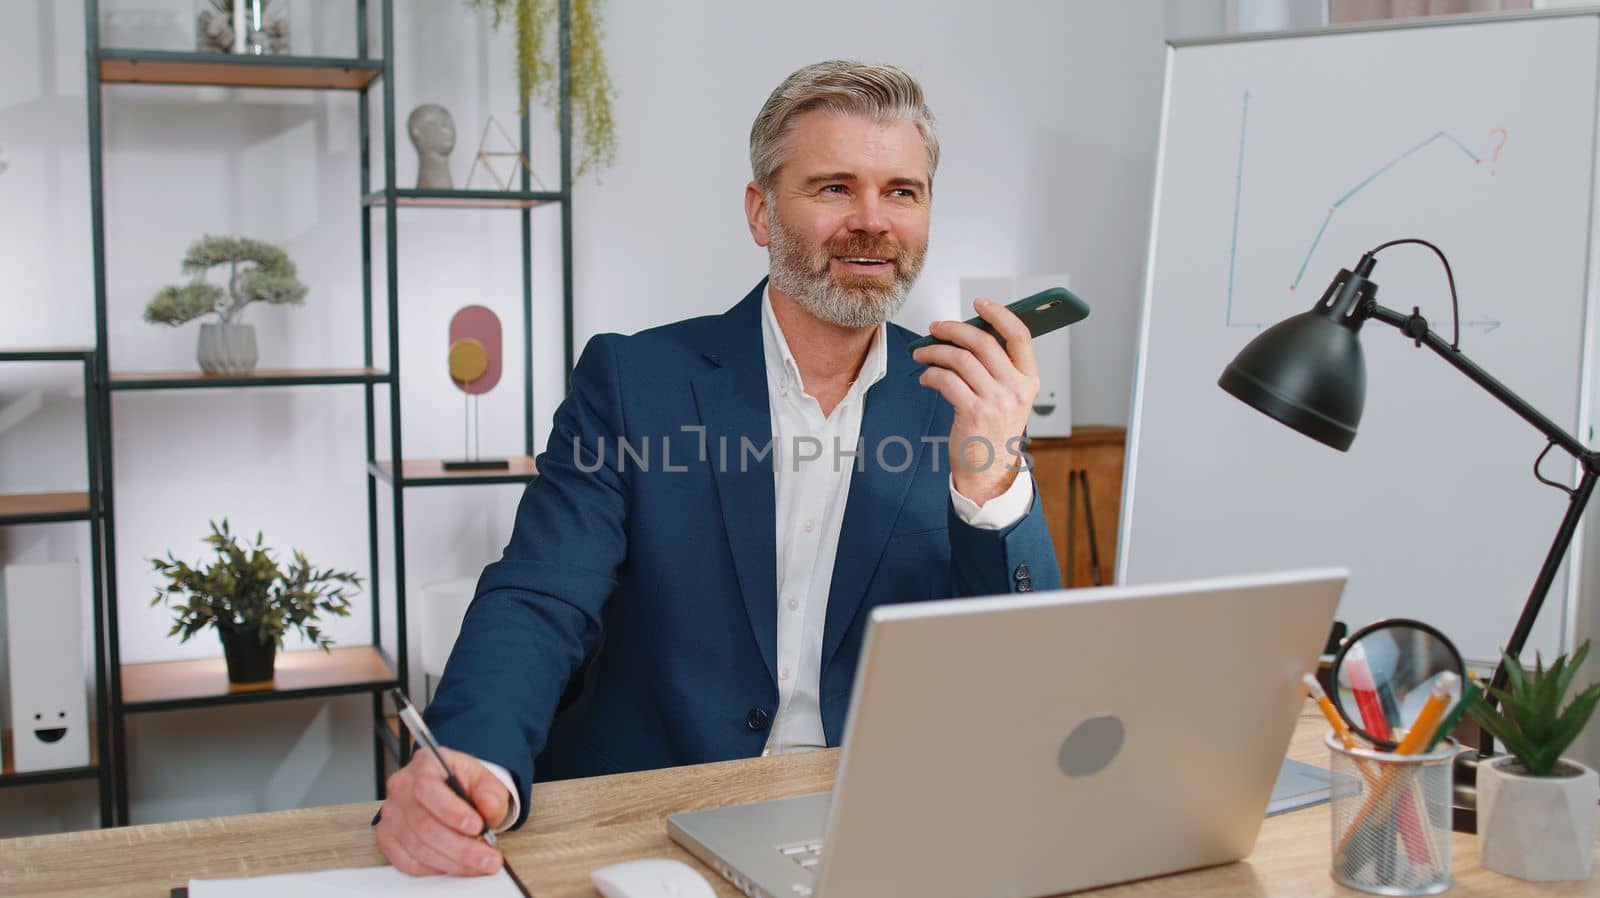 Mature businessman working, having mobile phone loudspeaker talk at office desk with laptop. Manager freelance old gray-haired man holding smartphone using messenger chat apps. Employment, occupation